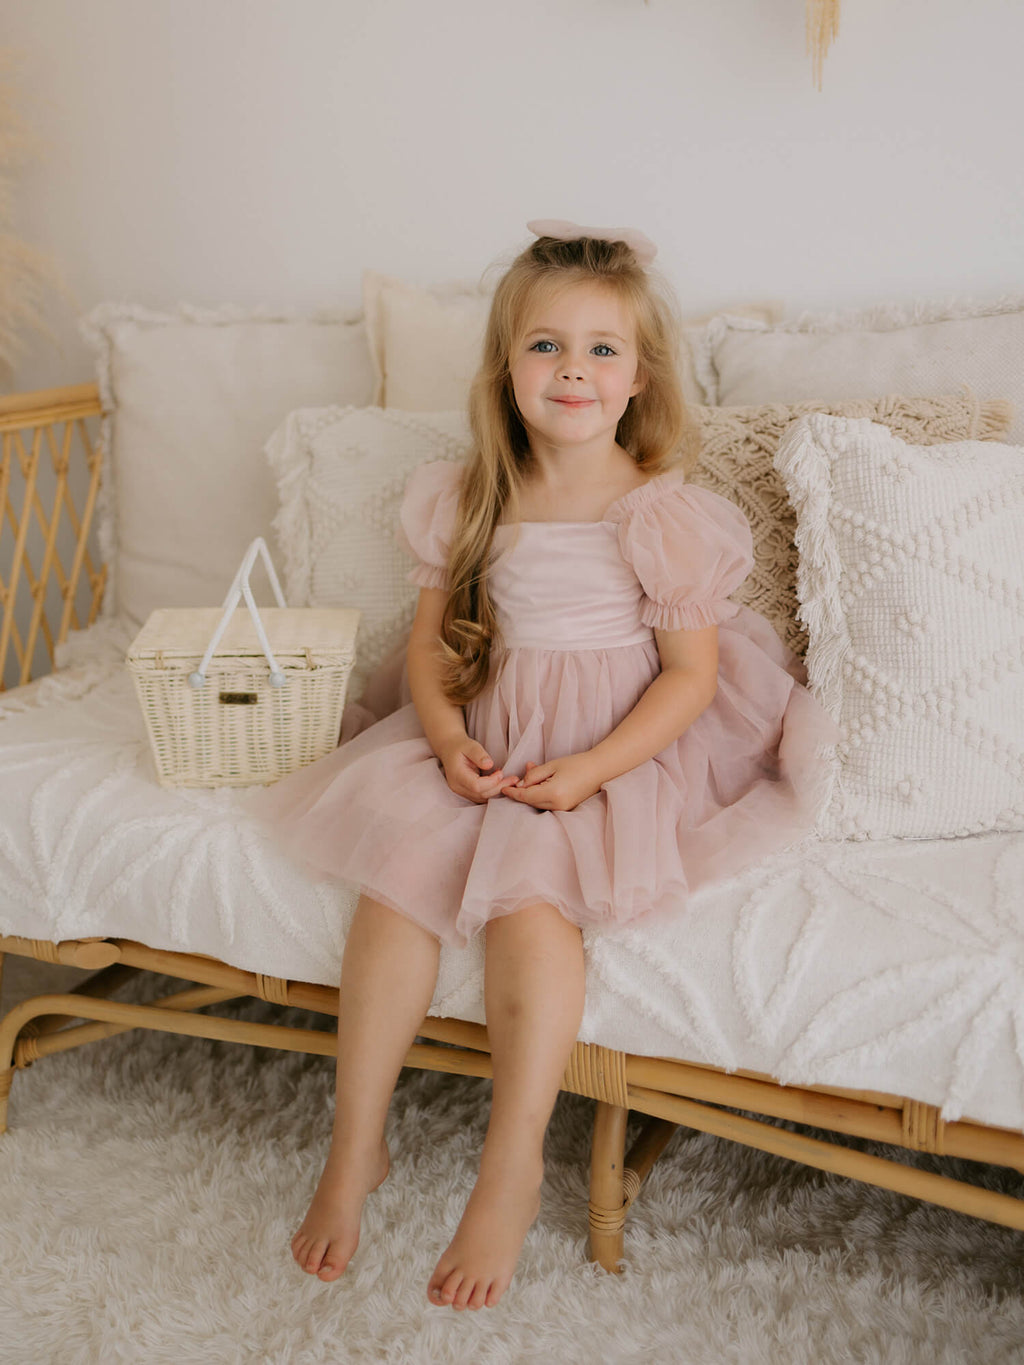 Layla puff sleeve flower girl dress and tulle bow hair clip, both in dusty pink, are worn by a young girl who sits on a rattan couch.